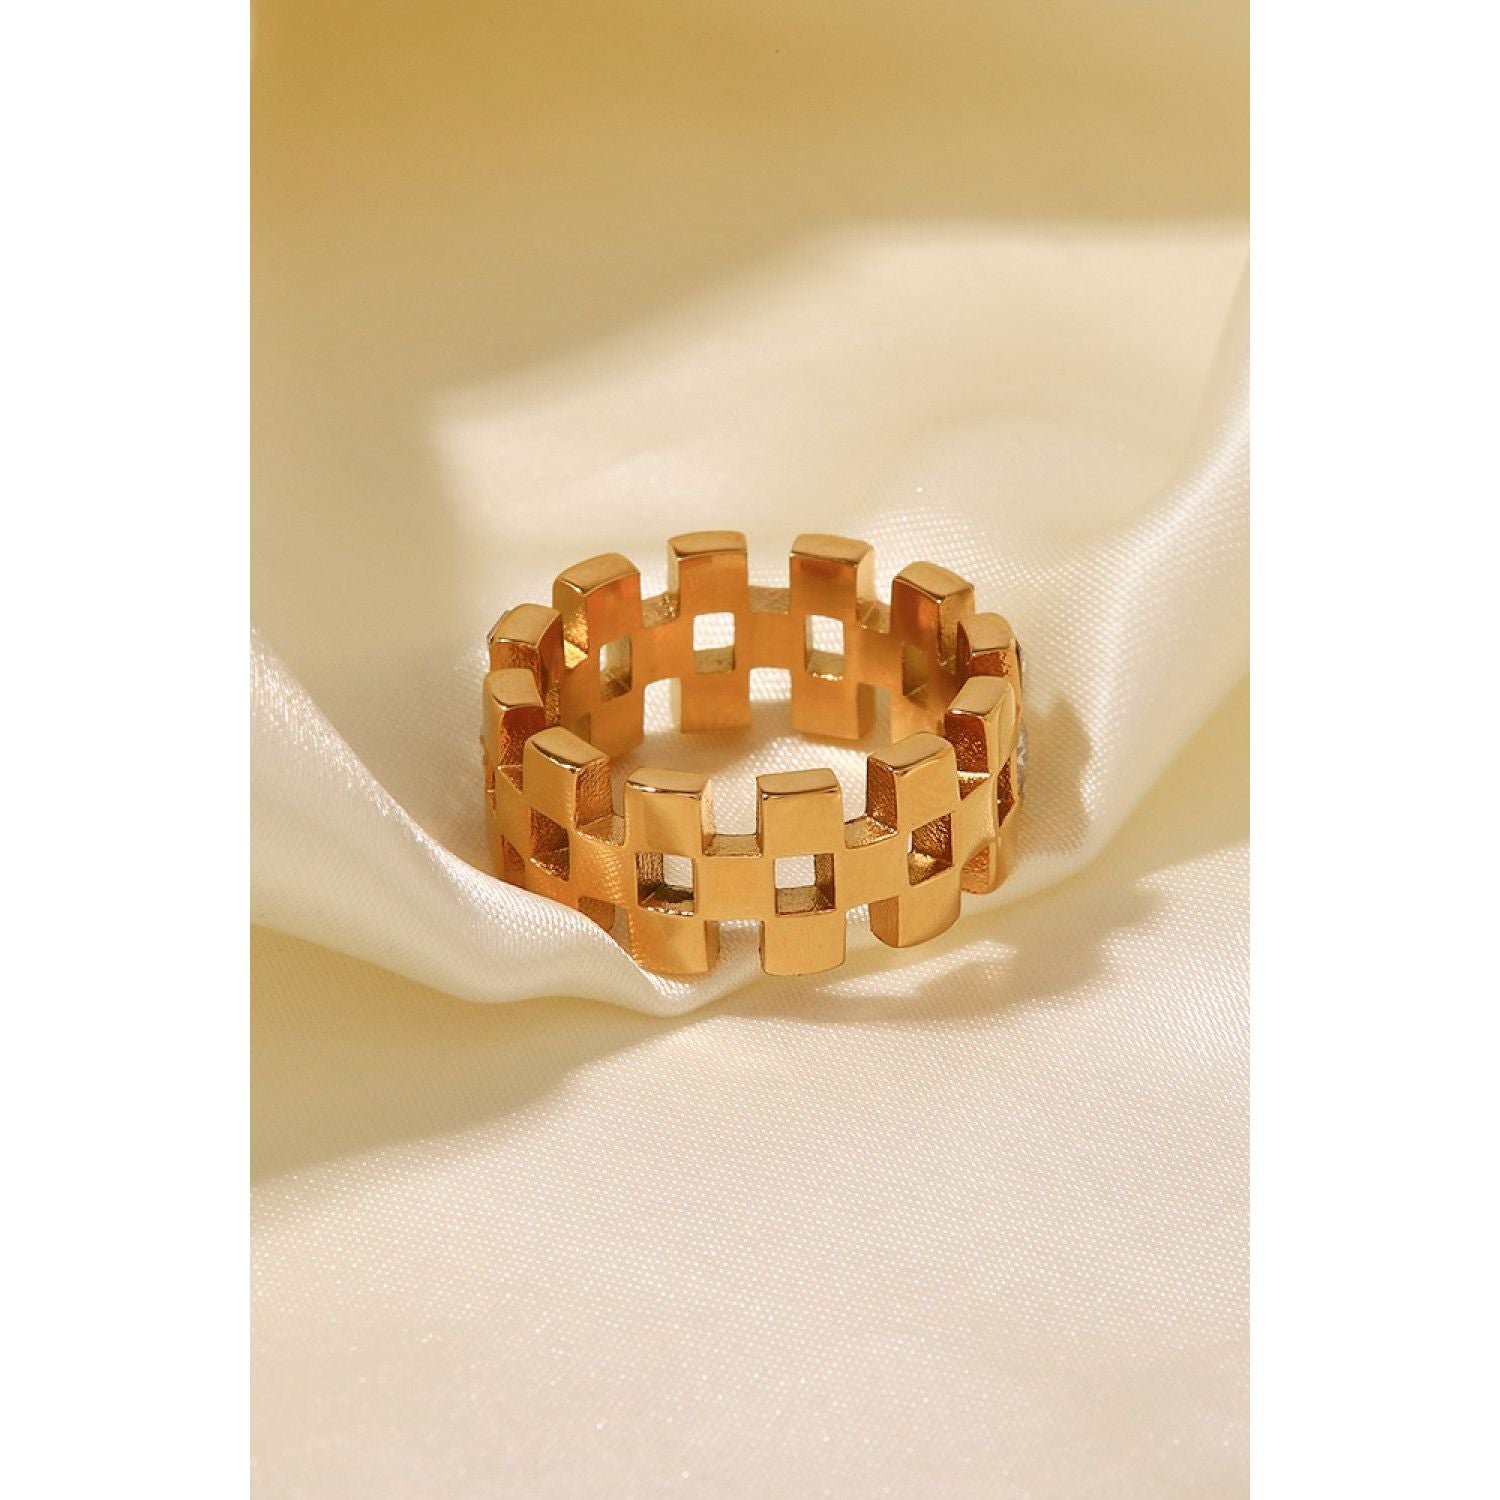 Contrast Stainless Steel 18K Gold-Plated Ring - TiffanyzKlozet